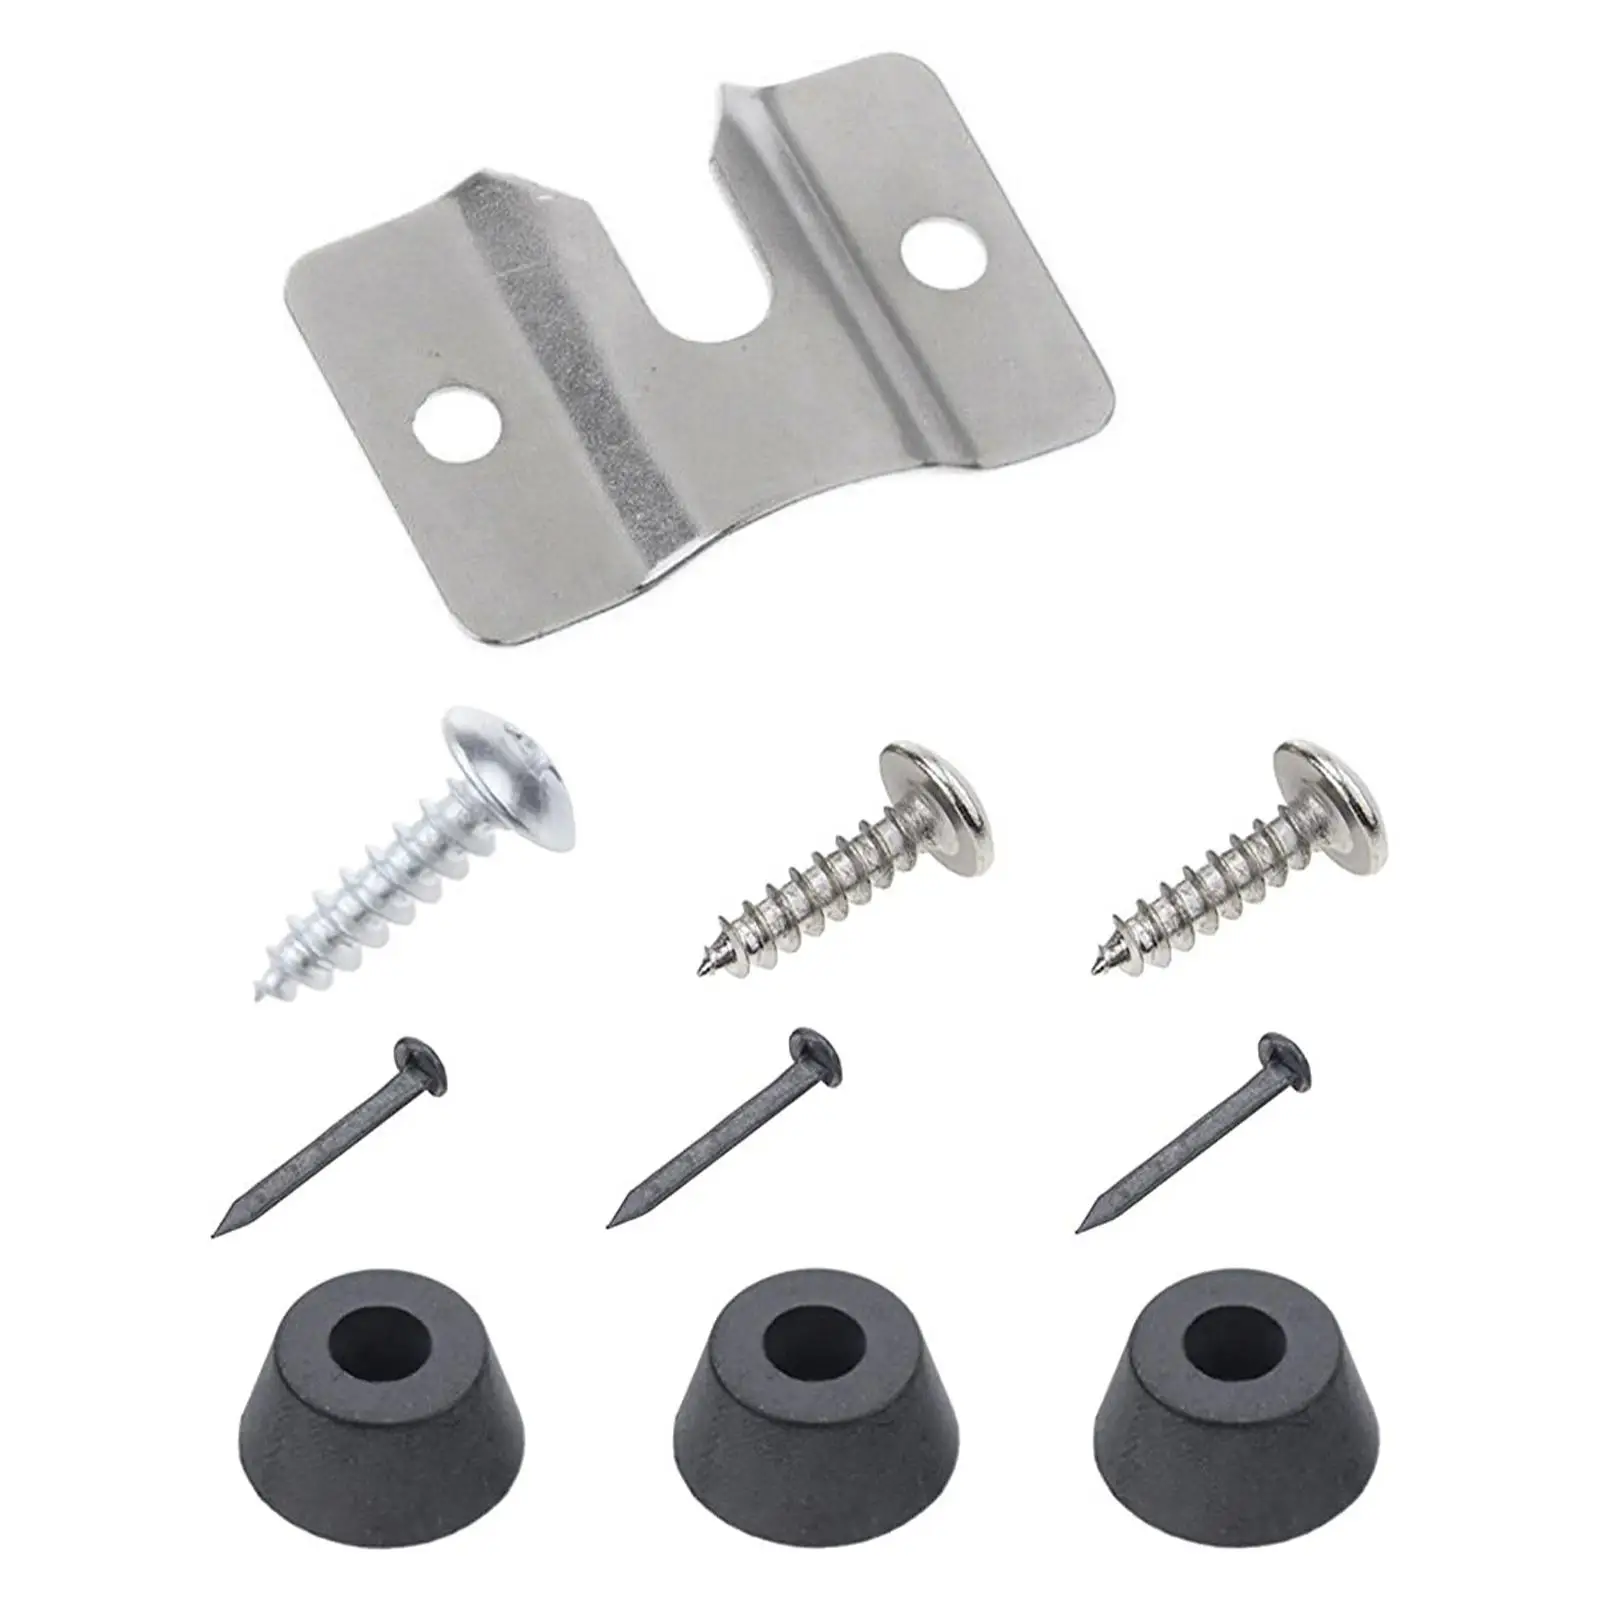  Board Hanging Kit, Wall Mounting Bracket Stainless Steel Sturdy with 3Pcs Small Fine Nails  Boards Holder for  Replacement